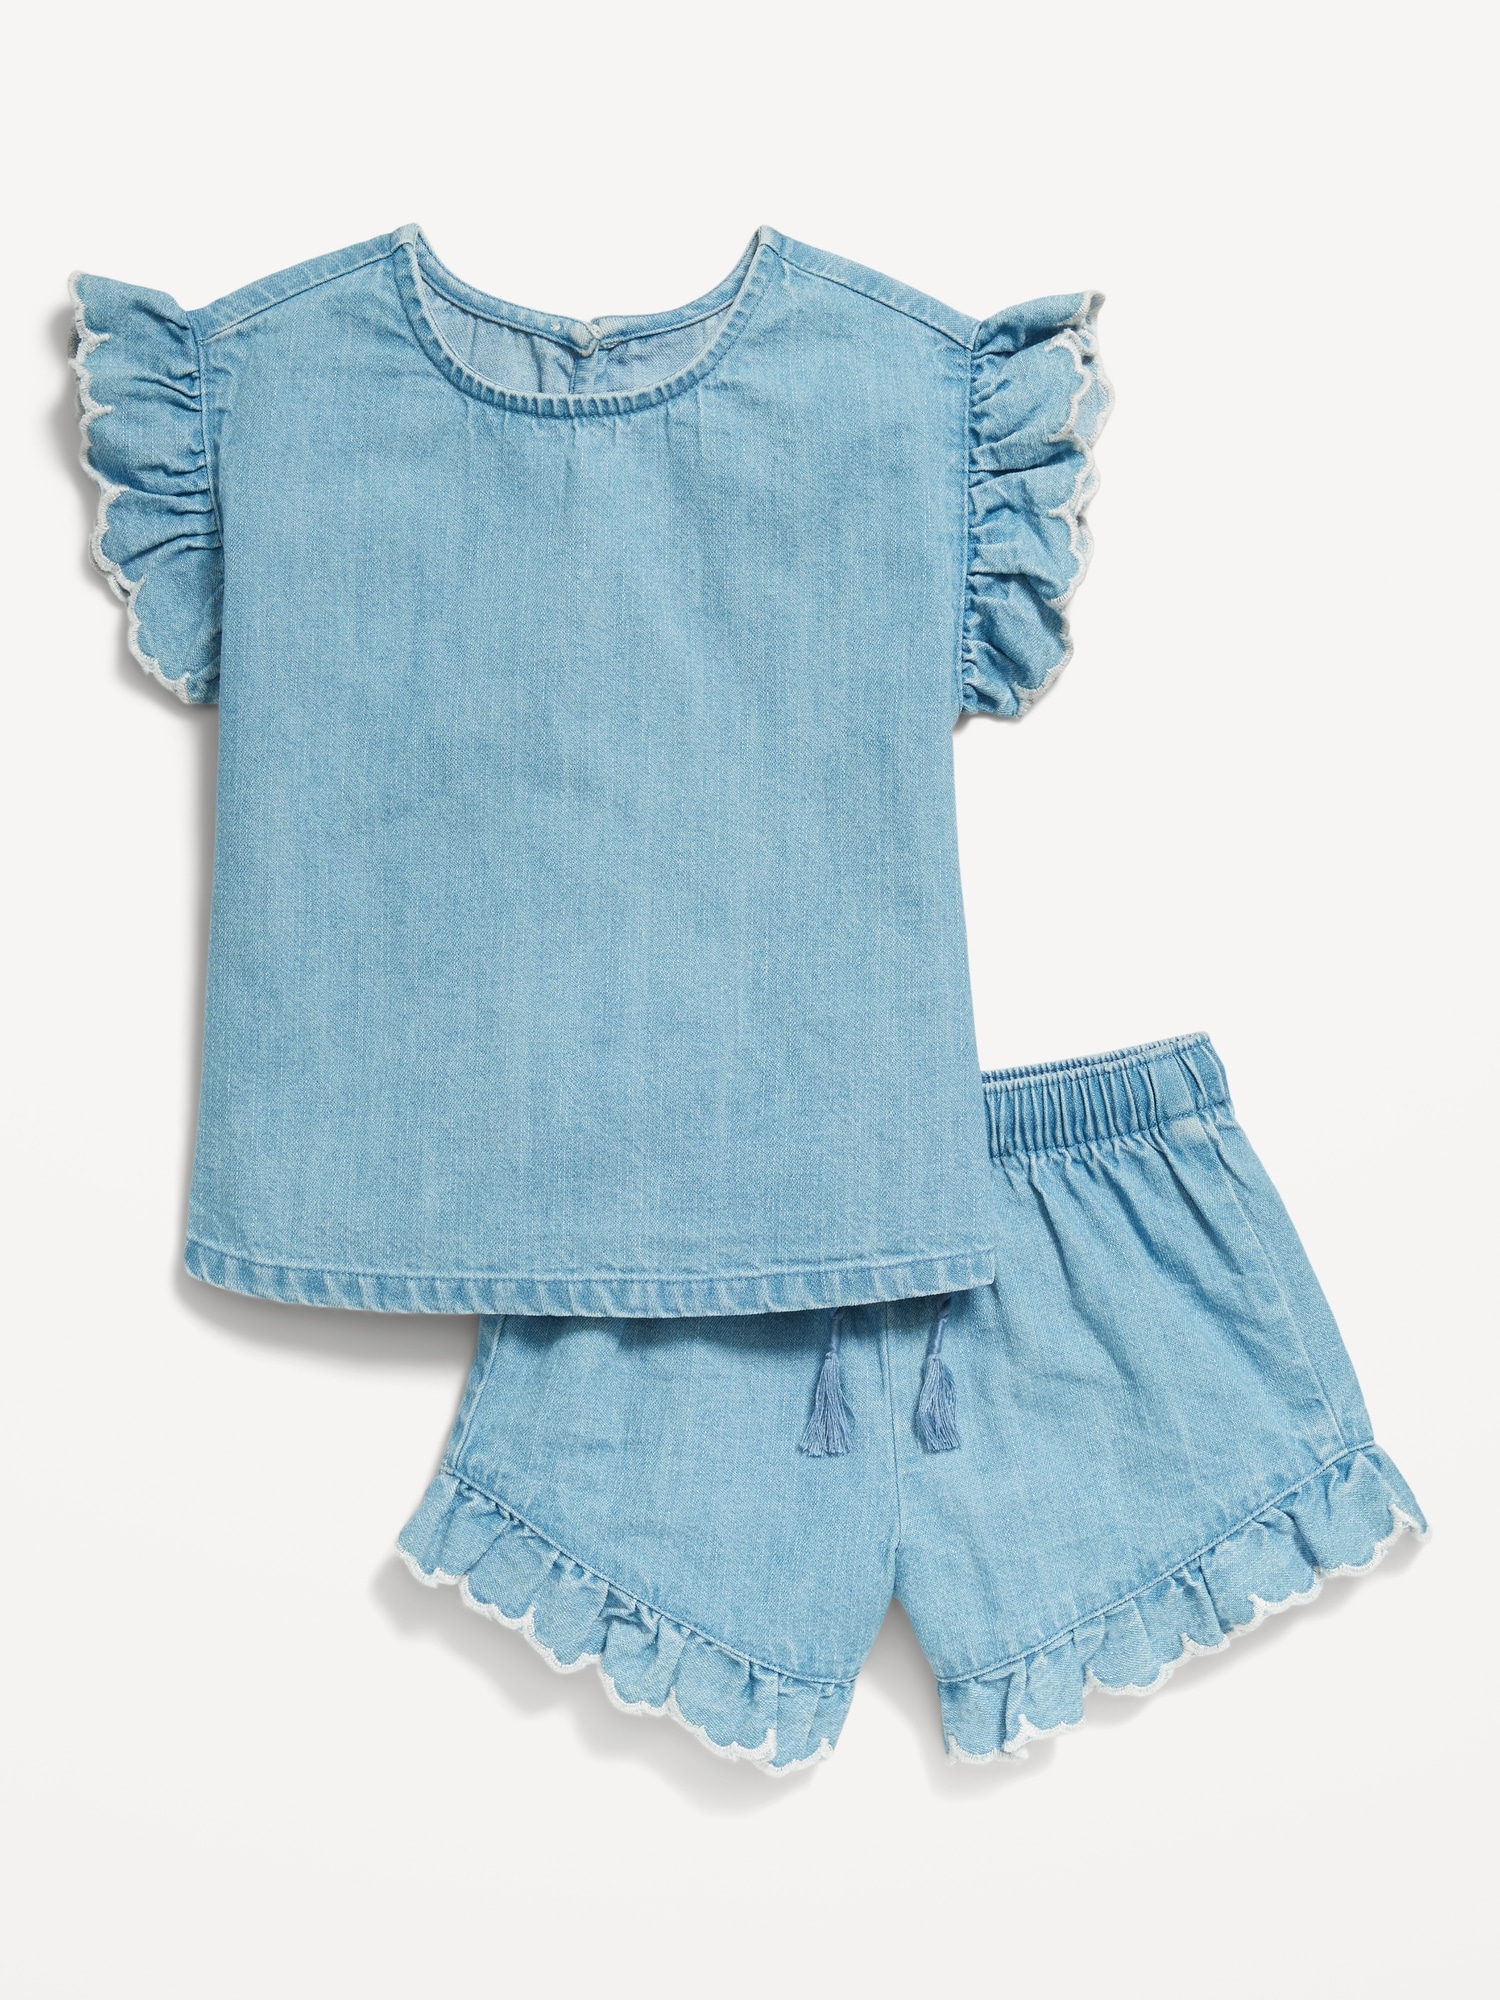 Ruffle-Trim Chambray Top and Shorts Set for Toddler Girls